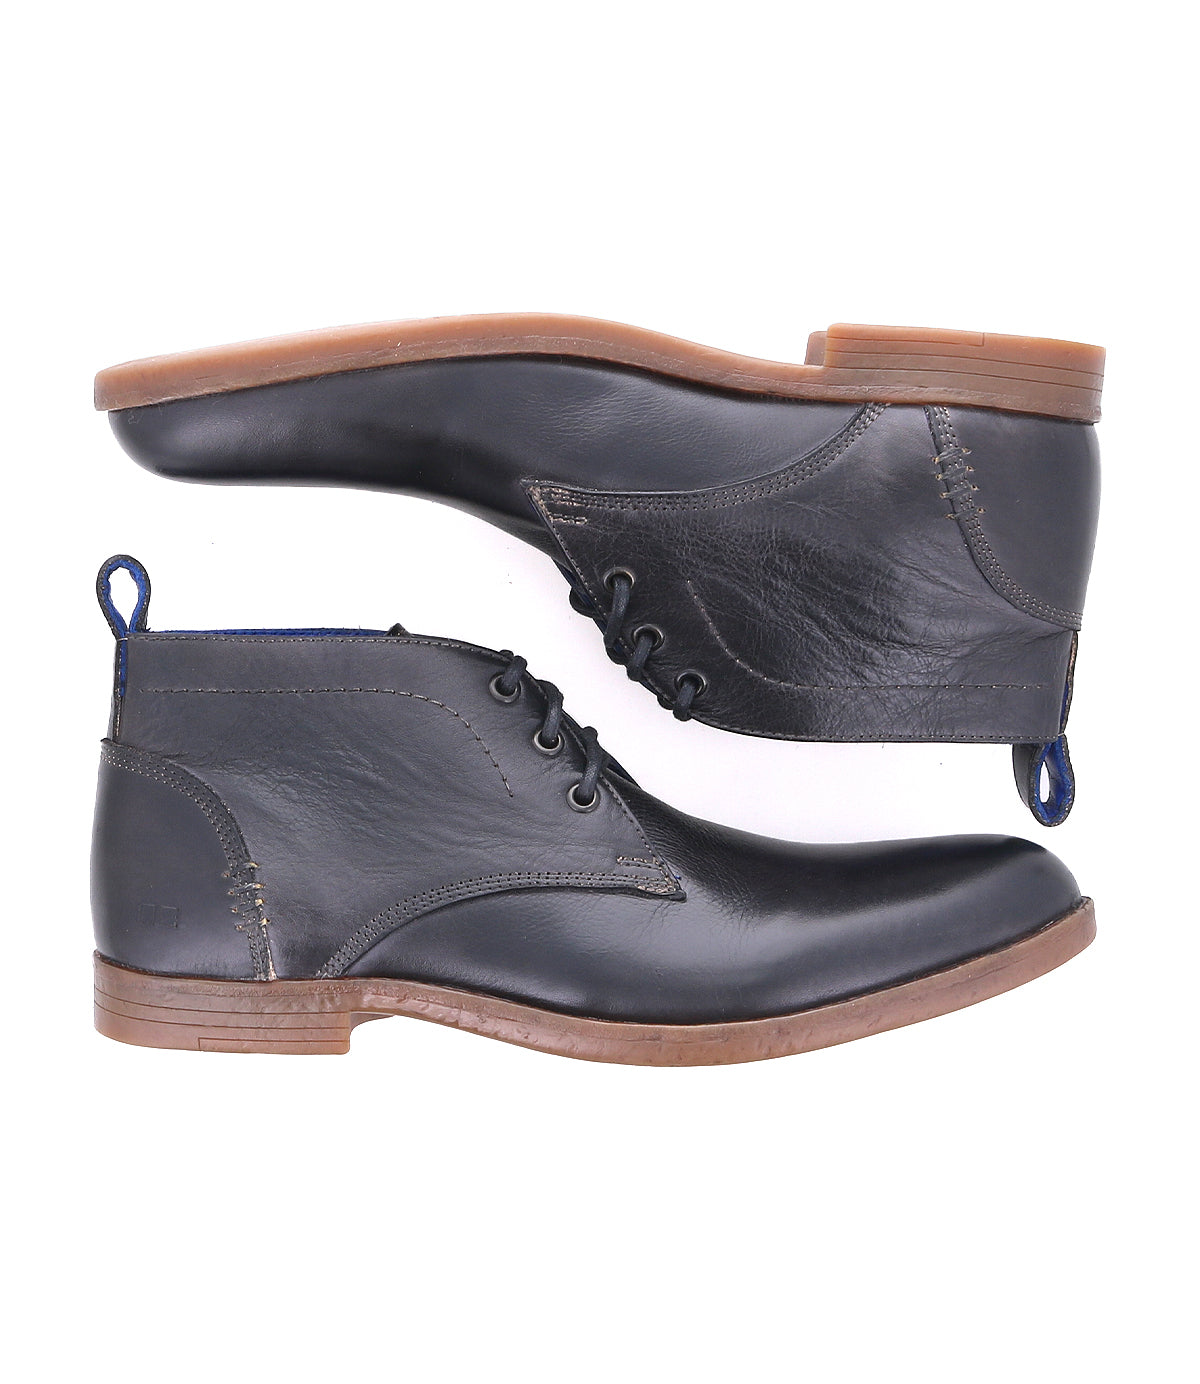 A pair of Bed Stu Illiad black leather chukka boots made with natural materials.